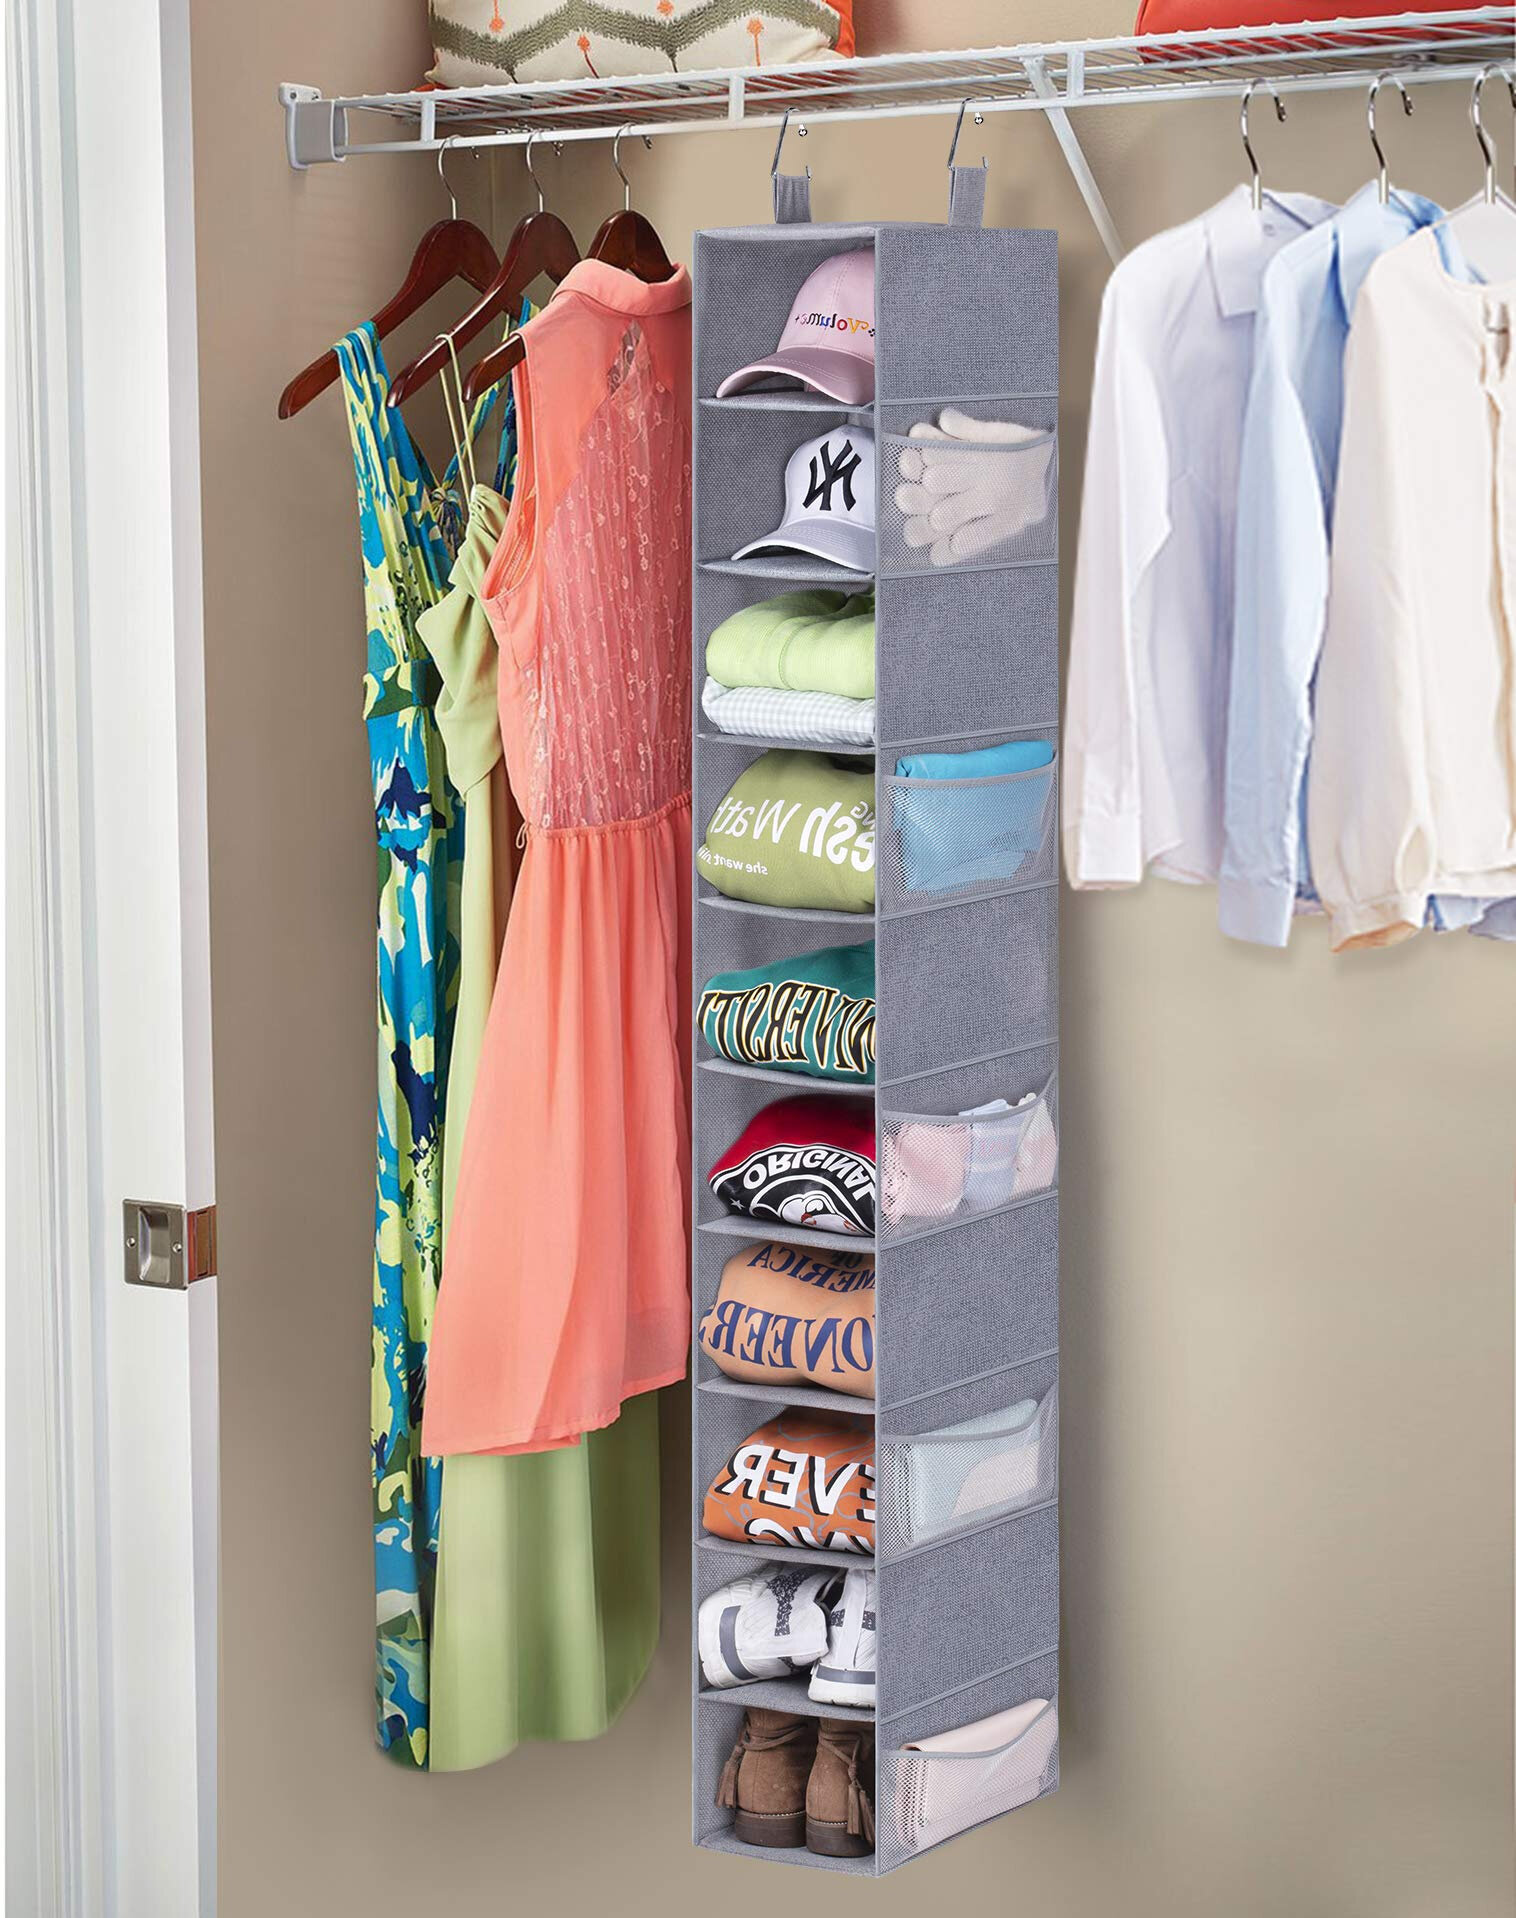 Clothes & Shoes Hanging Cupboard Storage Strong & Durable Hanging Shelves with Metal Hooks Breathable 5-Shelf Hanging Wardrobe Storage Organiser Easy Access Closet Storage System with Pockets